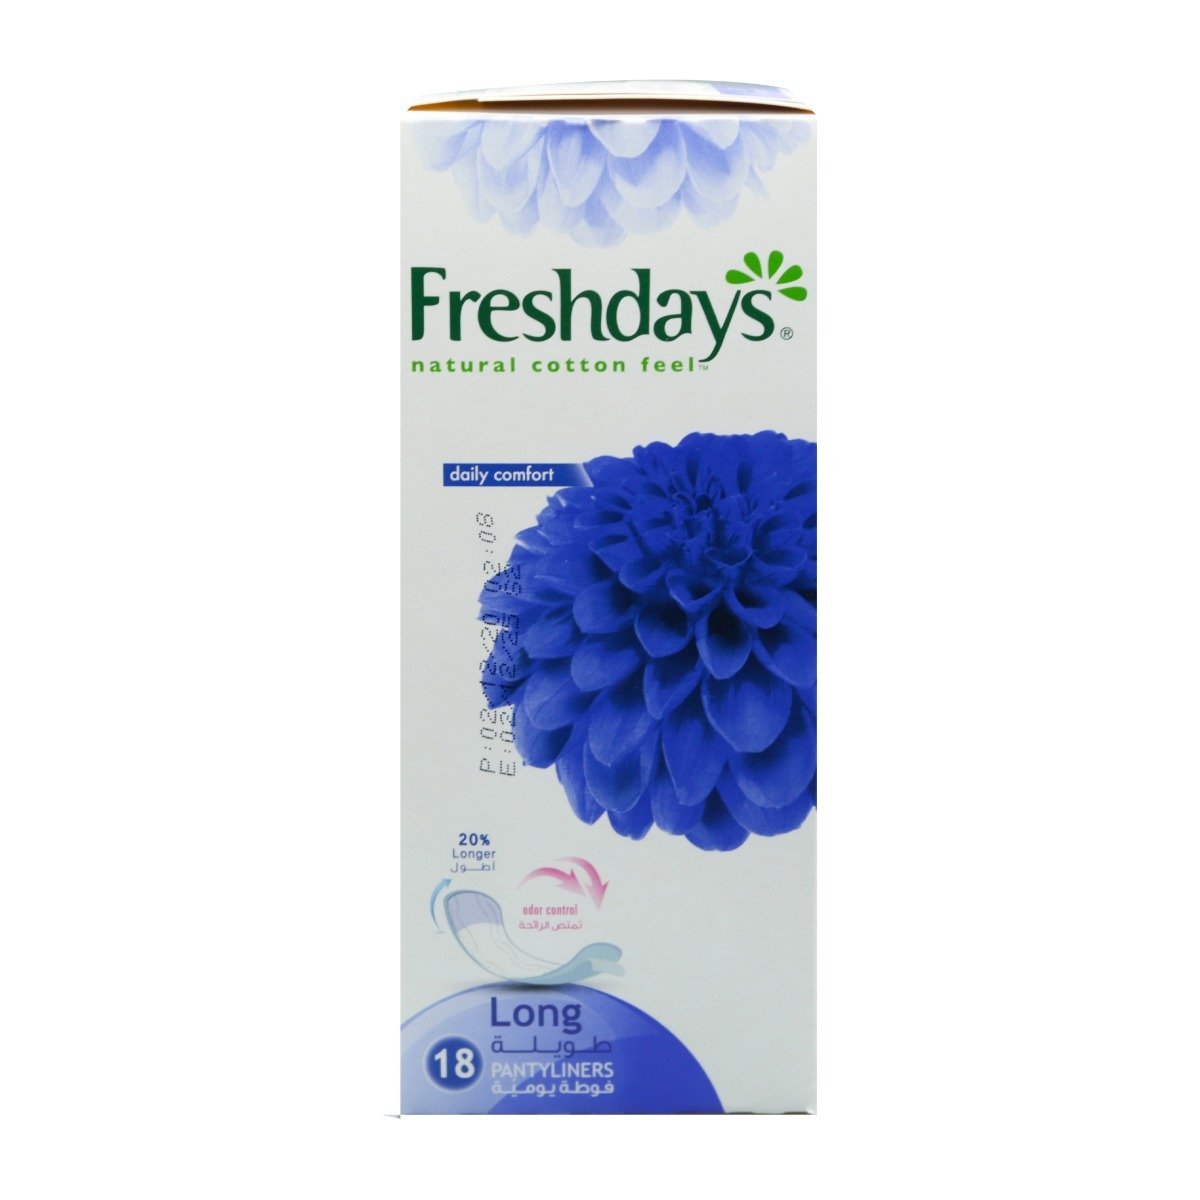 Freshdays Daily Comfort Long Odor Control - 18 Pantyliners - Bloom Pharmacy